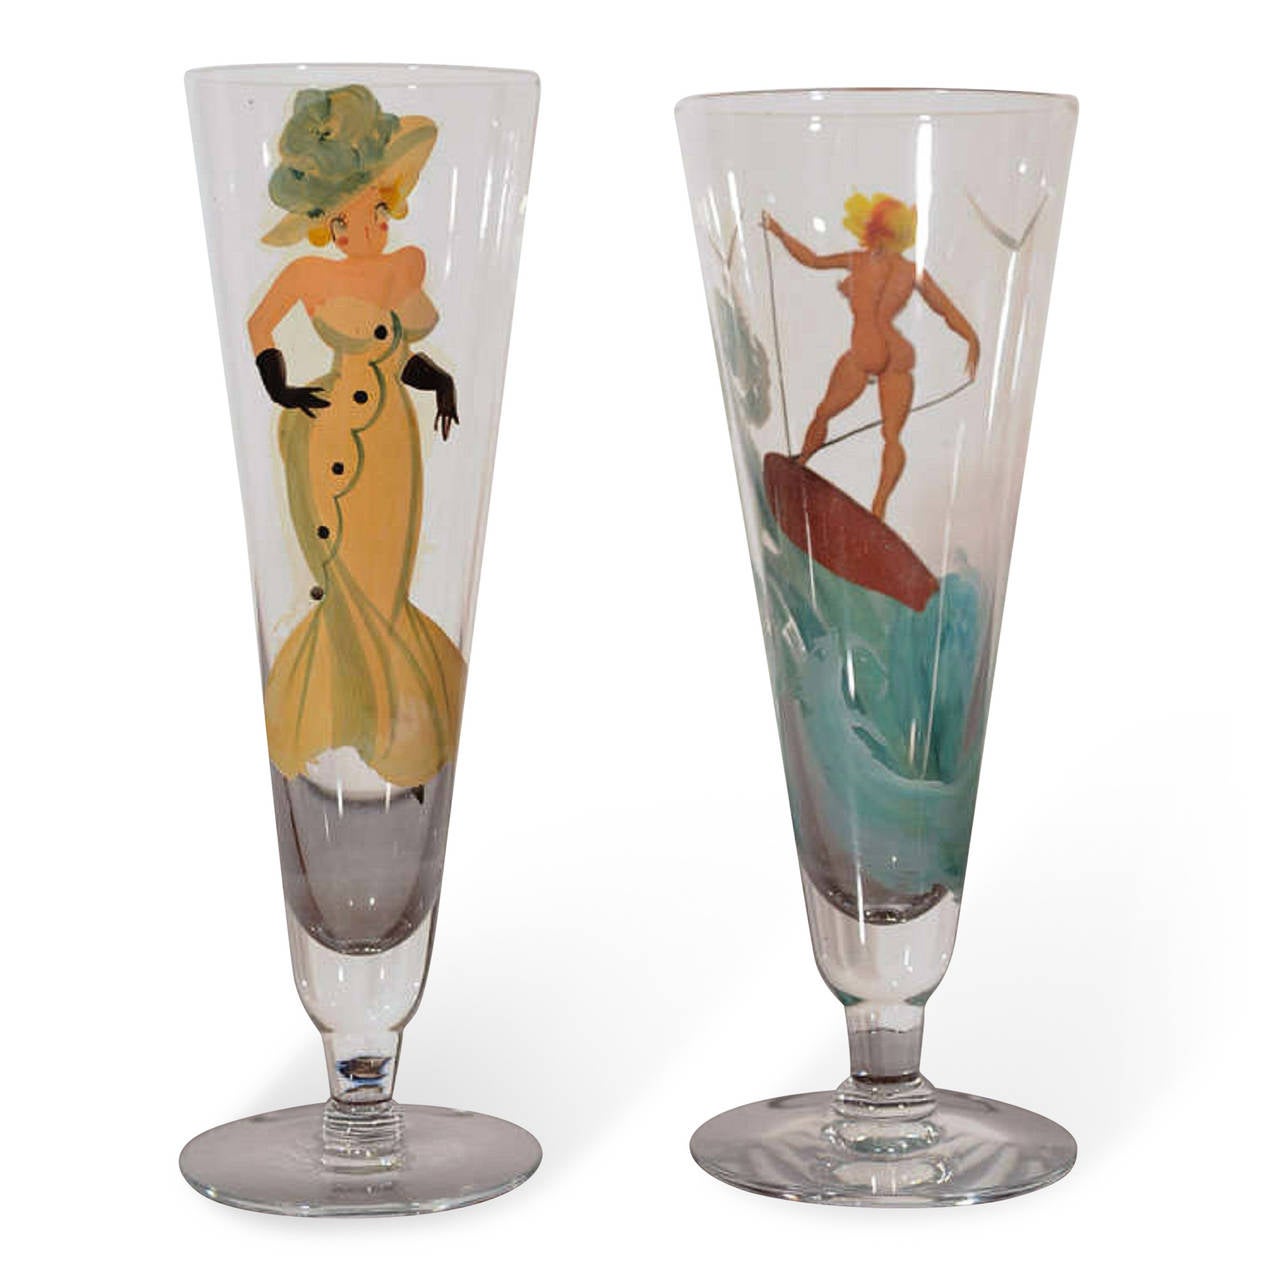 Set of Hand-Painted Pin Up Girl Drinking Glasses from the Estate of Doris Duke 1